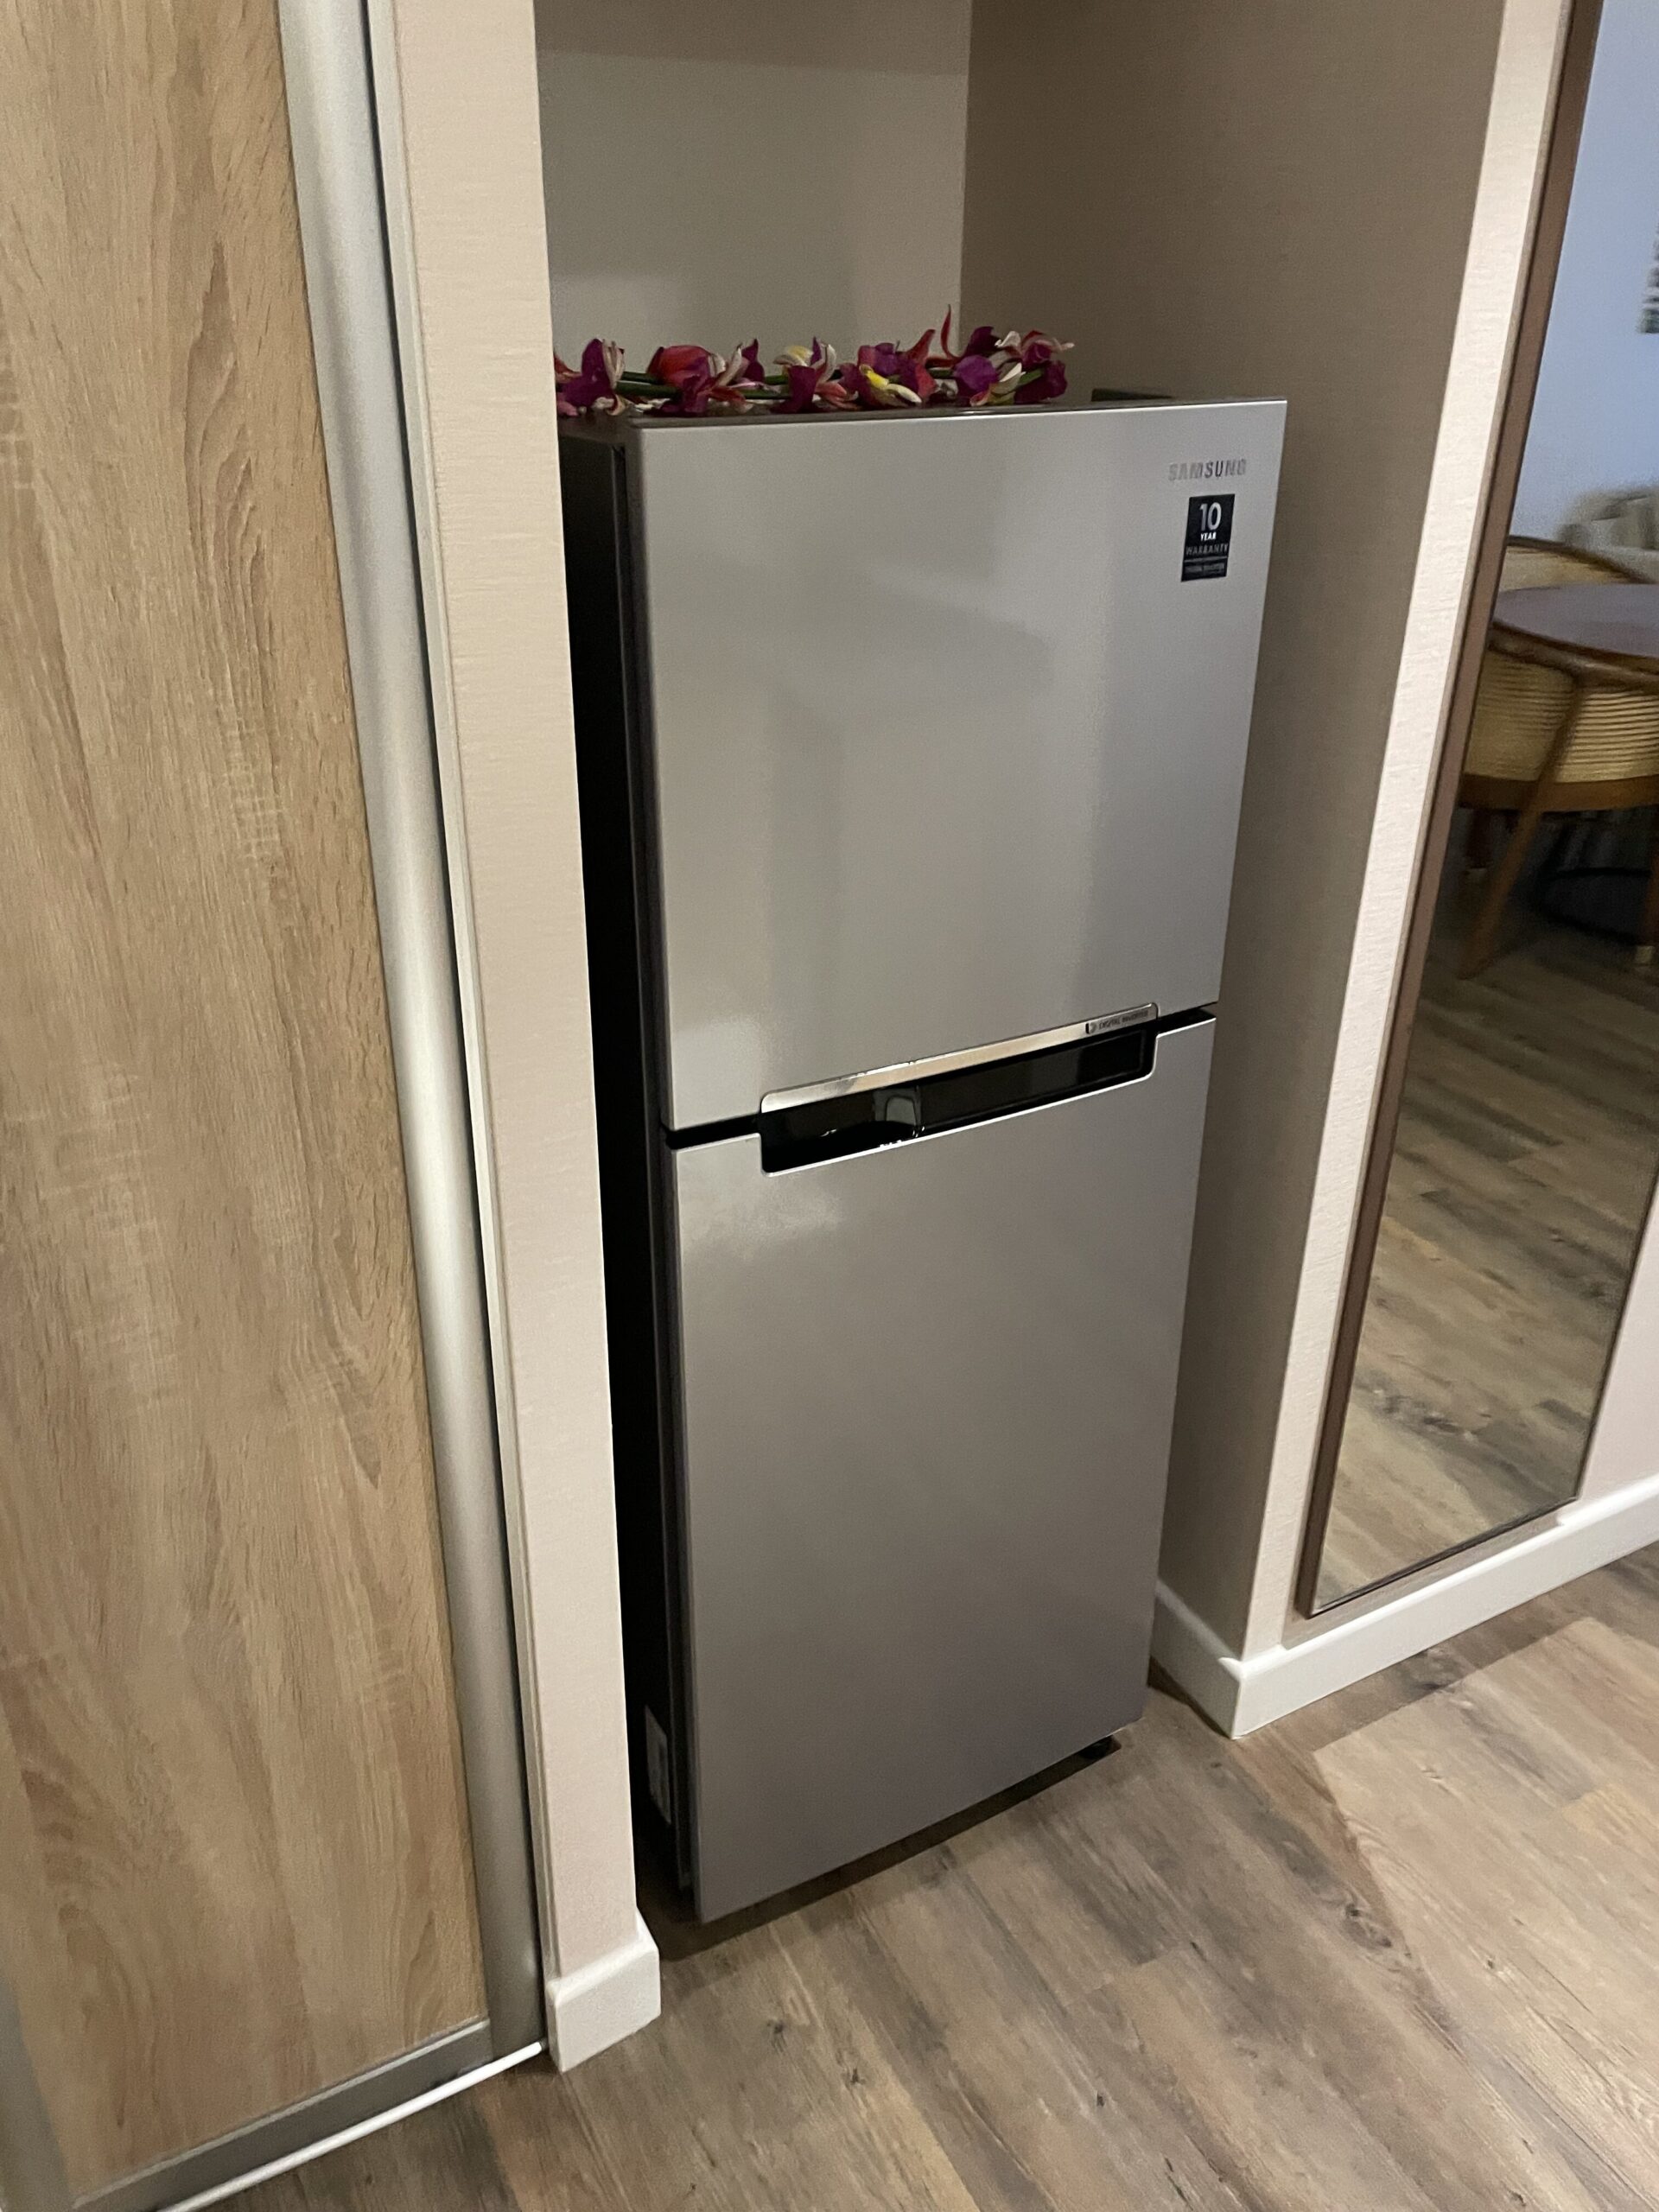 a refrigerator with flowers on top